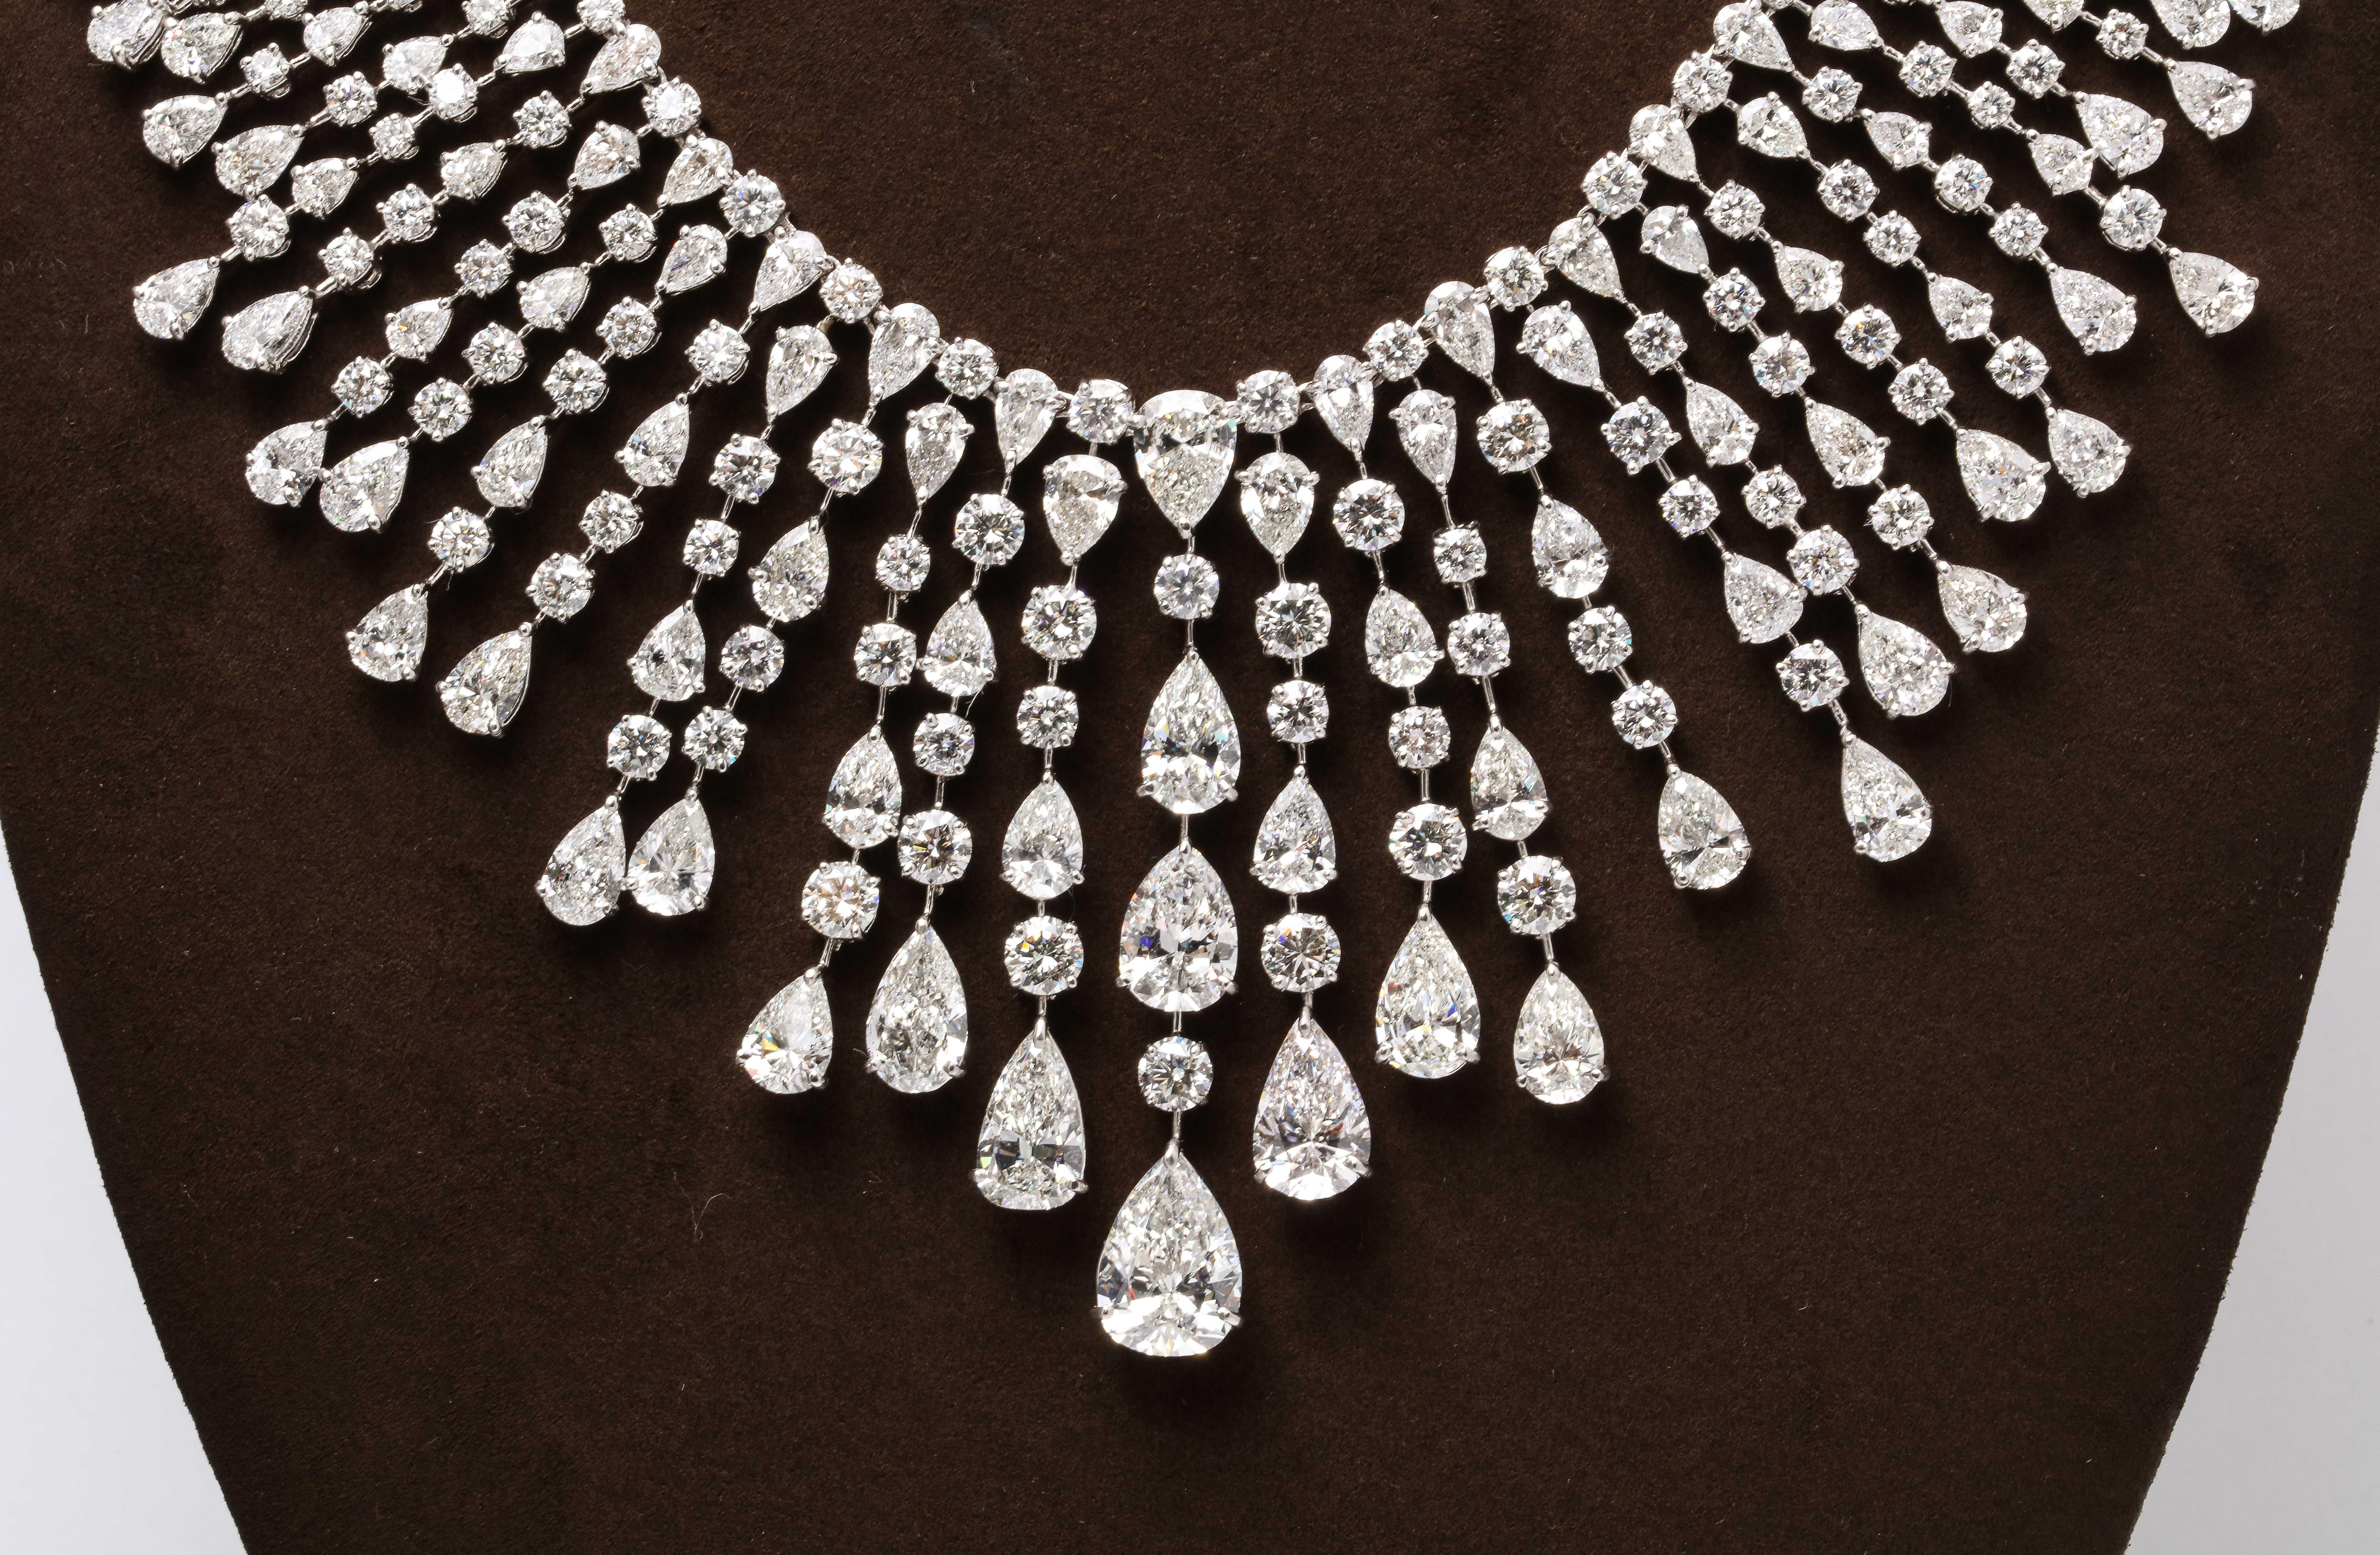 
A MASTERPIECE

This important diamond necklace features over 128 carats of white pear shape and round diamonds. 

This piece is made up of many diamonds above 1 carat up to the 5 carat pear shaped drop. 
The center line drop features 2, 3, and 5